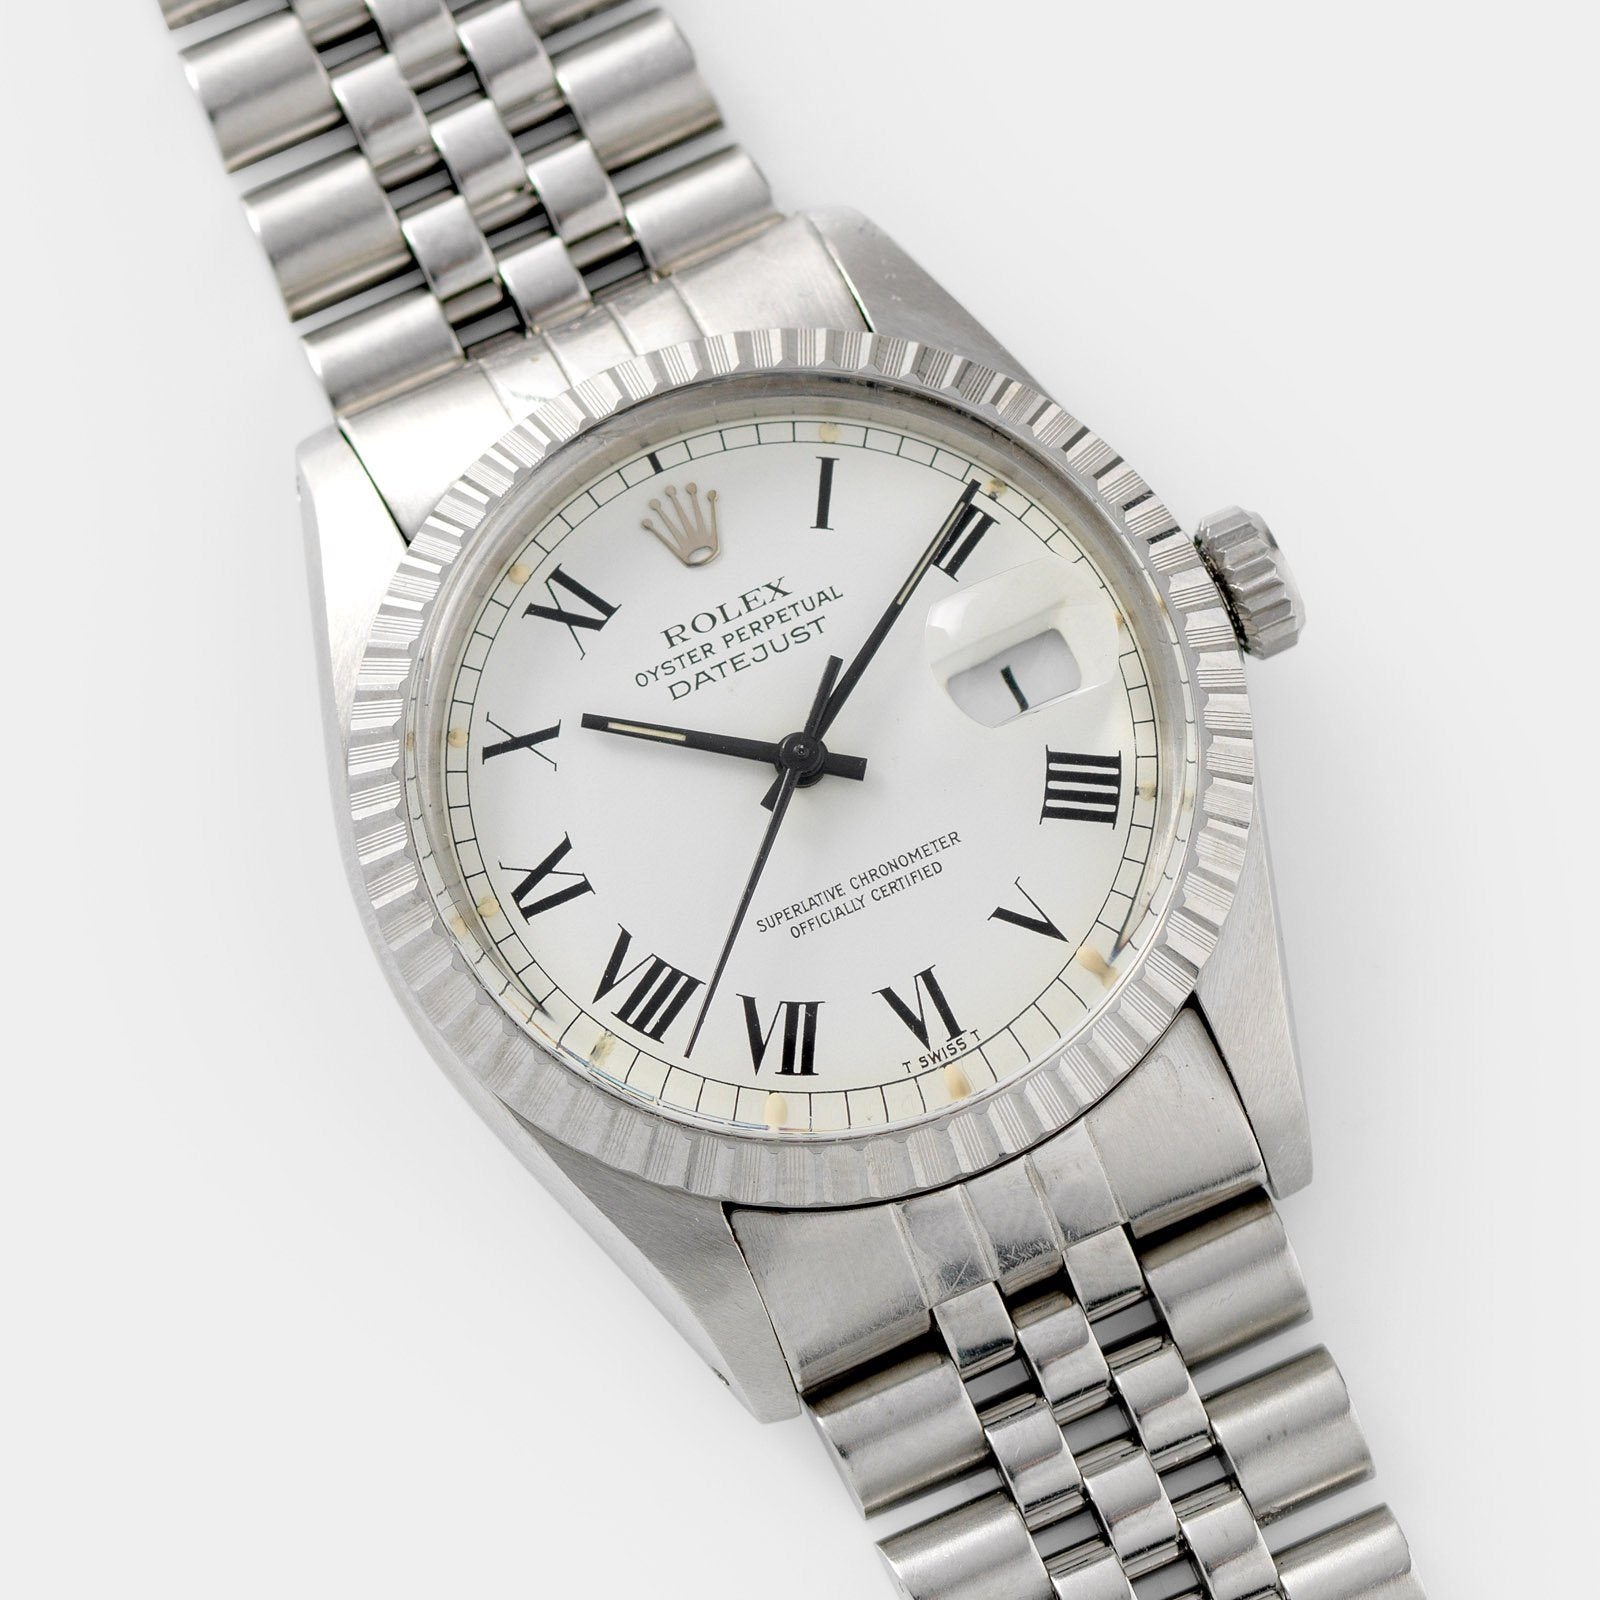 Rolex Datejust Reference 16030 White Buckley Dial Box and Papers